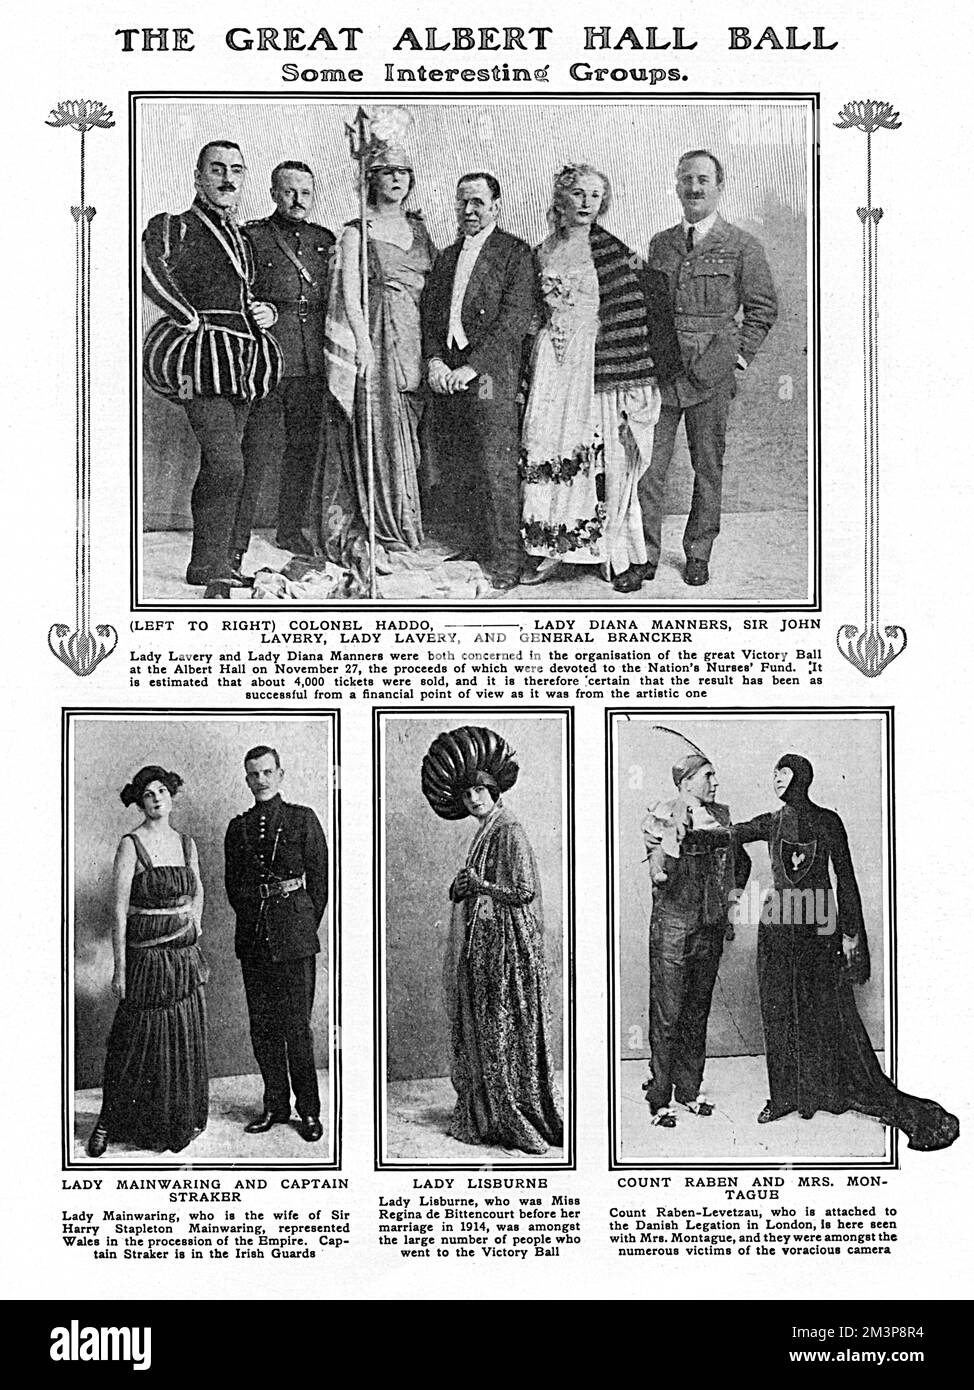 Prominent members of society and notable personalities, pictured in fancy dress at the famous Victory Ball, held at the Royal Albert Hall in November 1918 to celebrate the end of the First World War.  Top photograph shows, from left to right, Colonel Haddo, unknown, Lady Diana Manners (later Cooper, dressed as Britannia), Sir John Lavery, Lady (Hazel) Lavery and General Brancker.  Along the bottom from left to right is Lady Mainwaring and Captain Straker of the Irish Guards, Lady Lisburne (formerly Regina de Bittencourt in a particularly flamboyant headdress), Count Raben-Levetzau, attached to Stock Photo